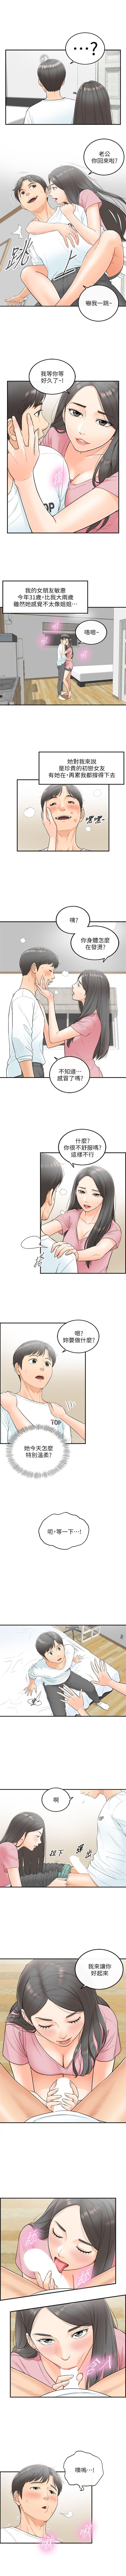 Lesbian 正妹小主管 1-53 官方中文（連載中） Solo Female - Page 5